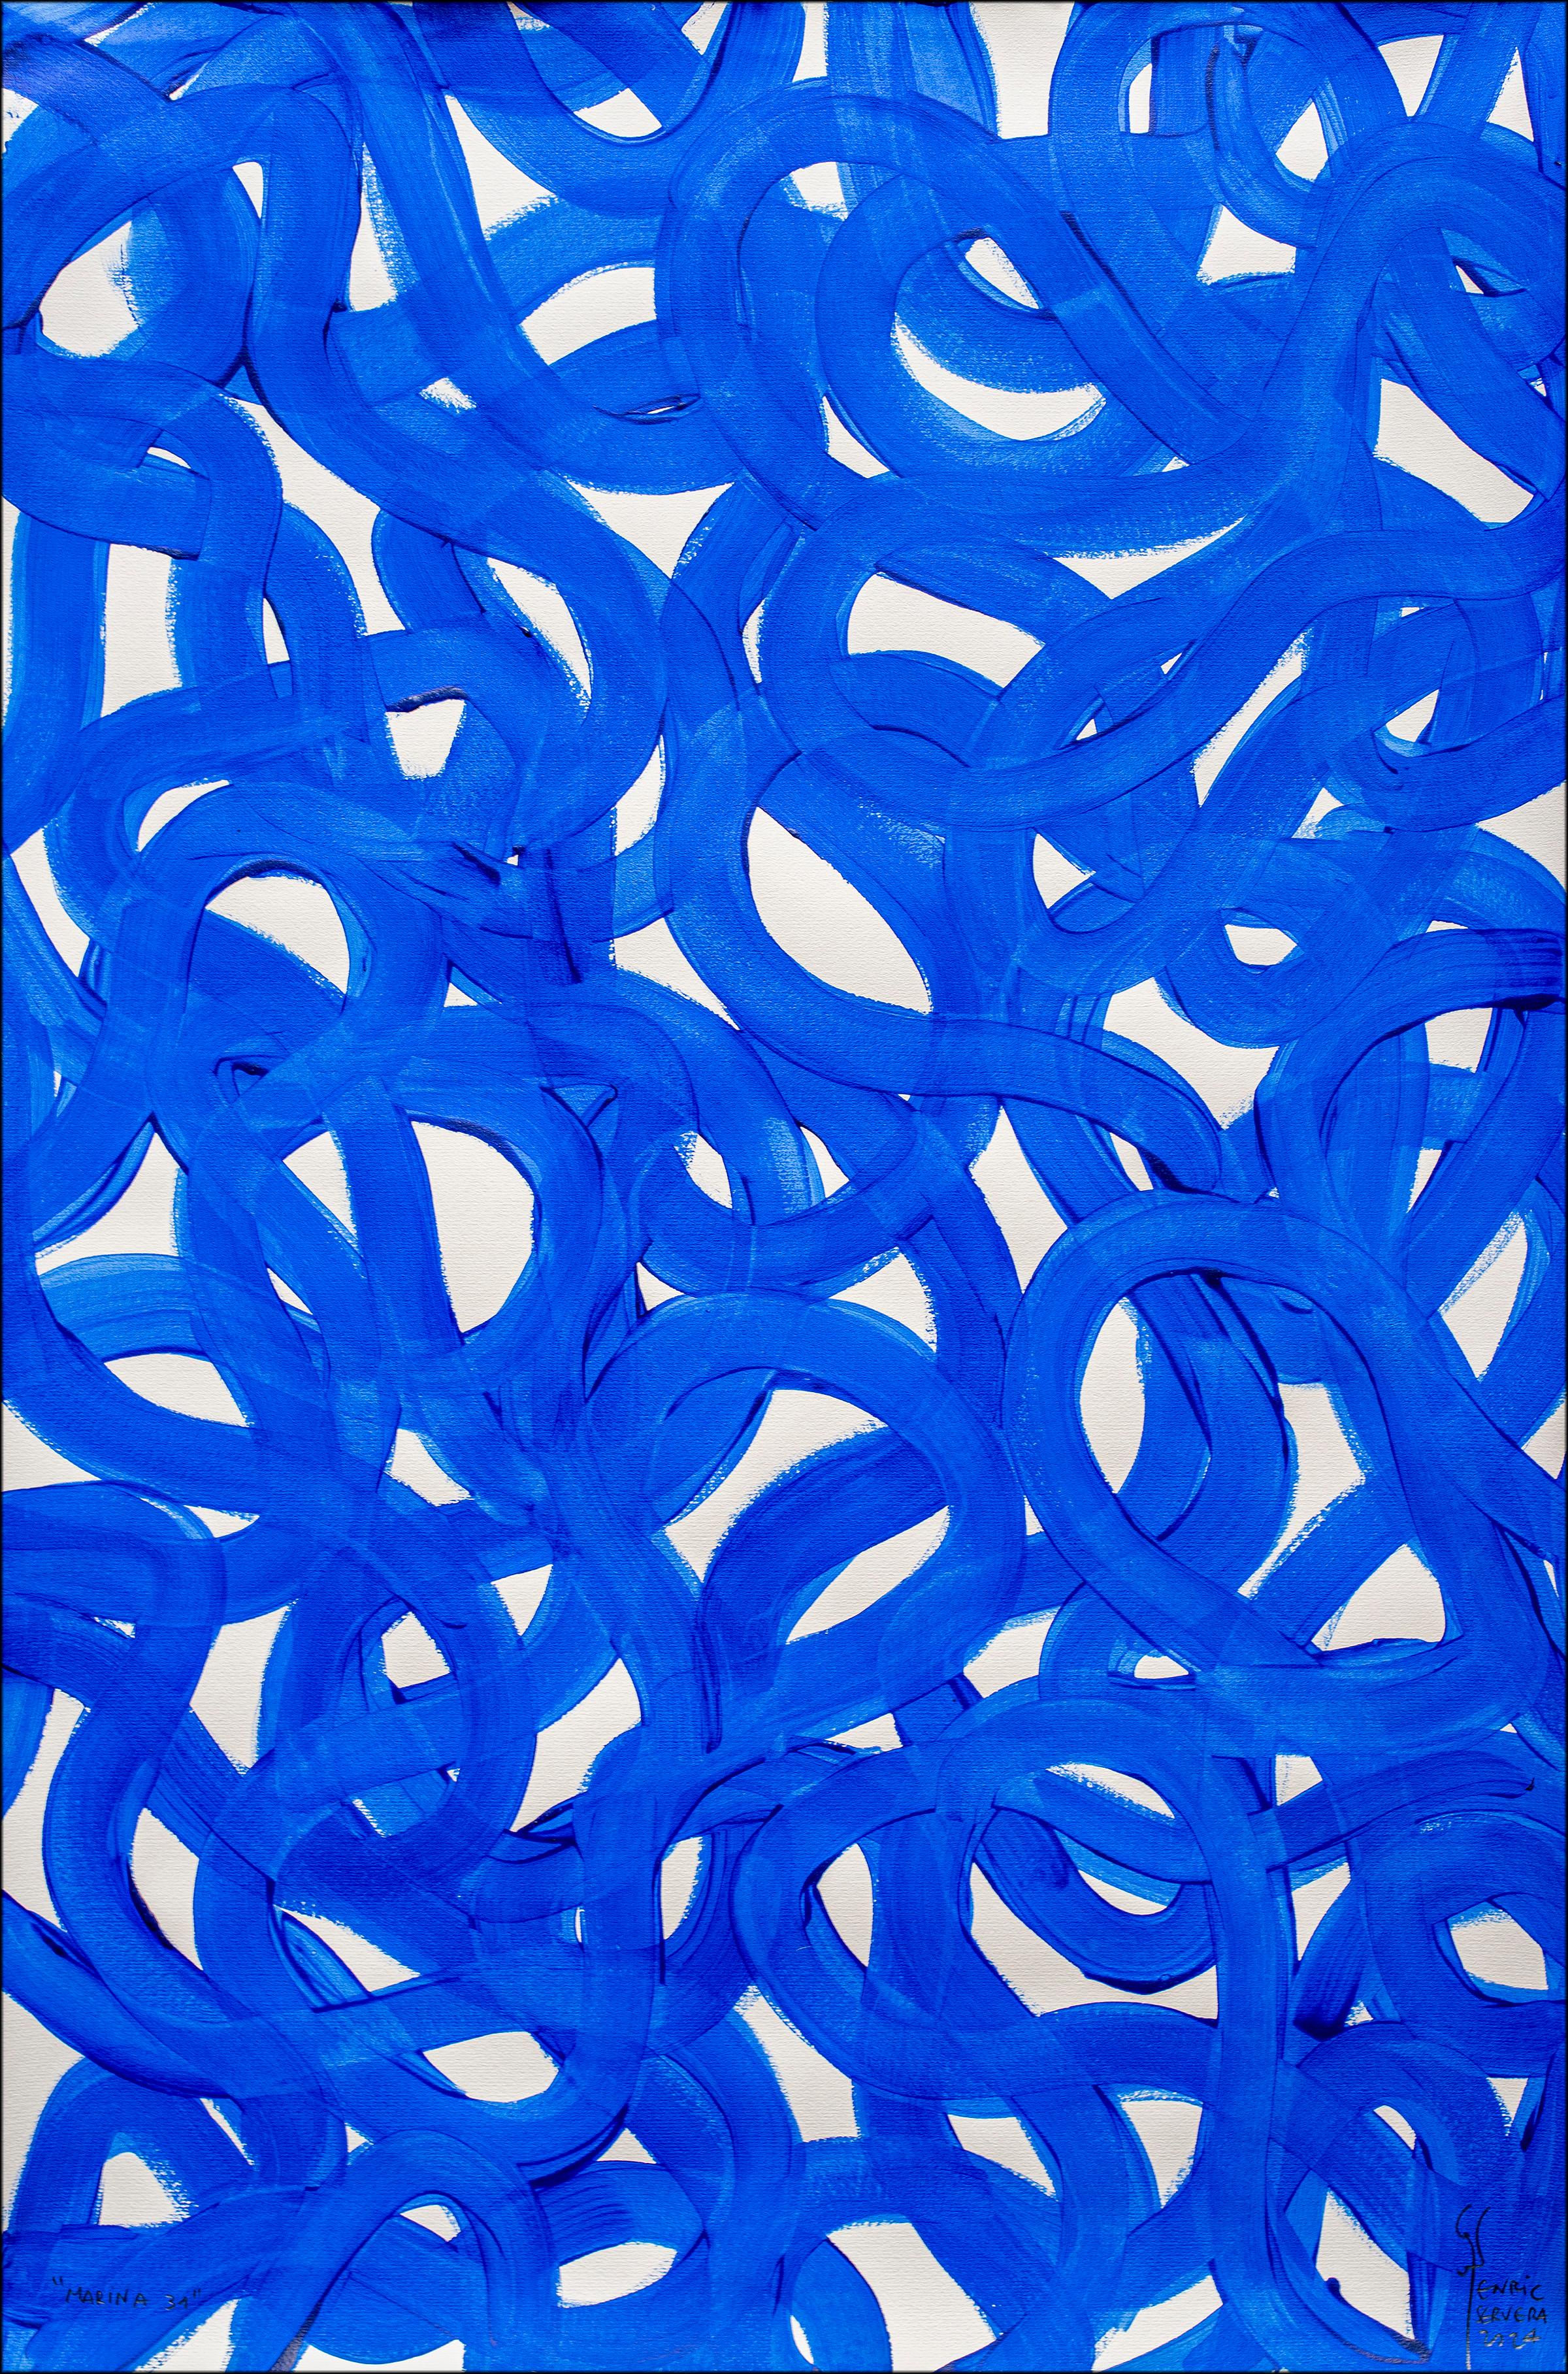 Blue and White Abstract Overlapping Shapes Fish Scribble Gestures, Mediterranean